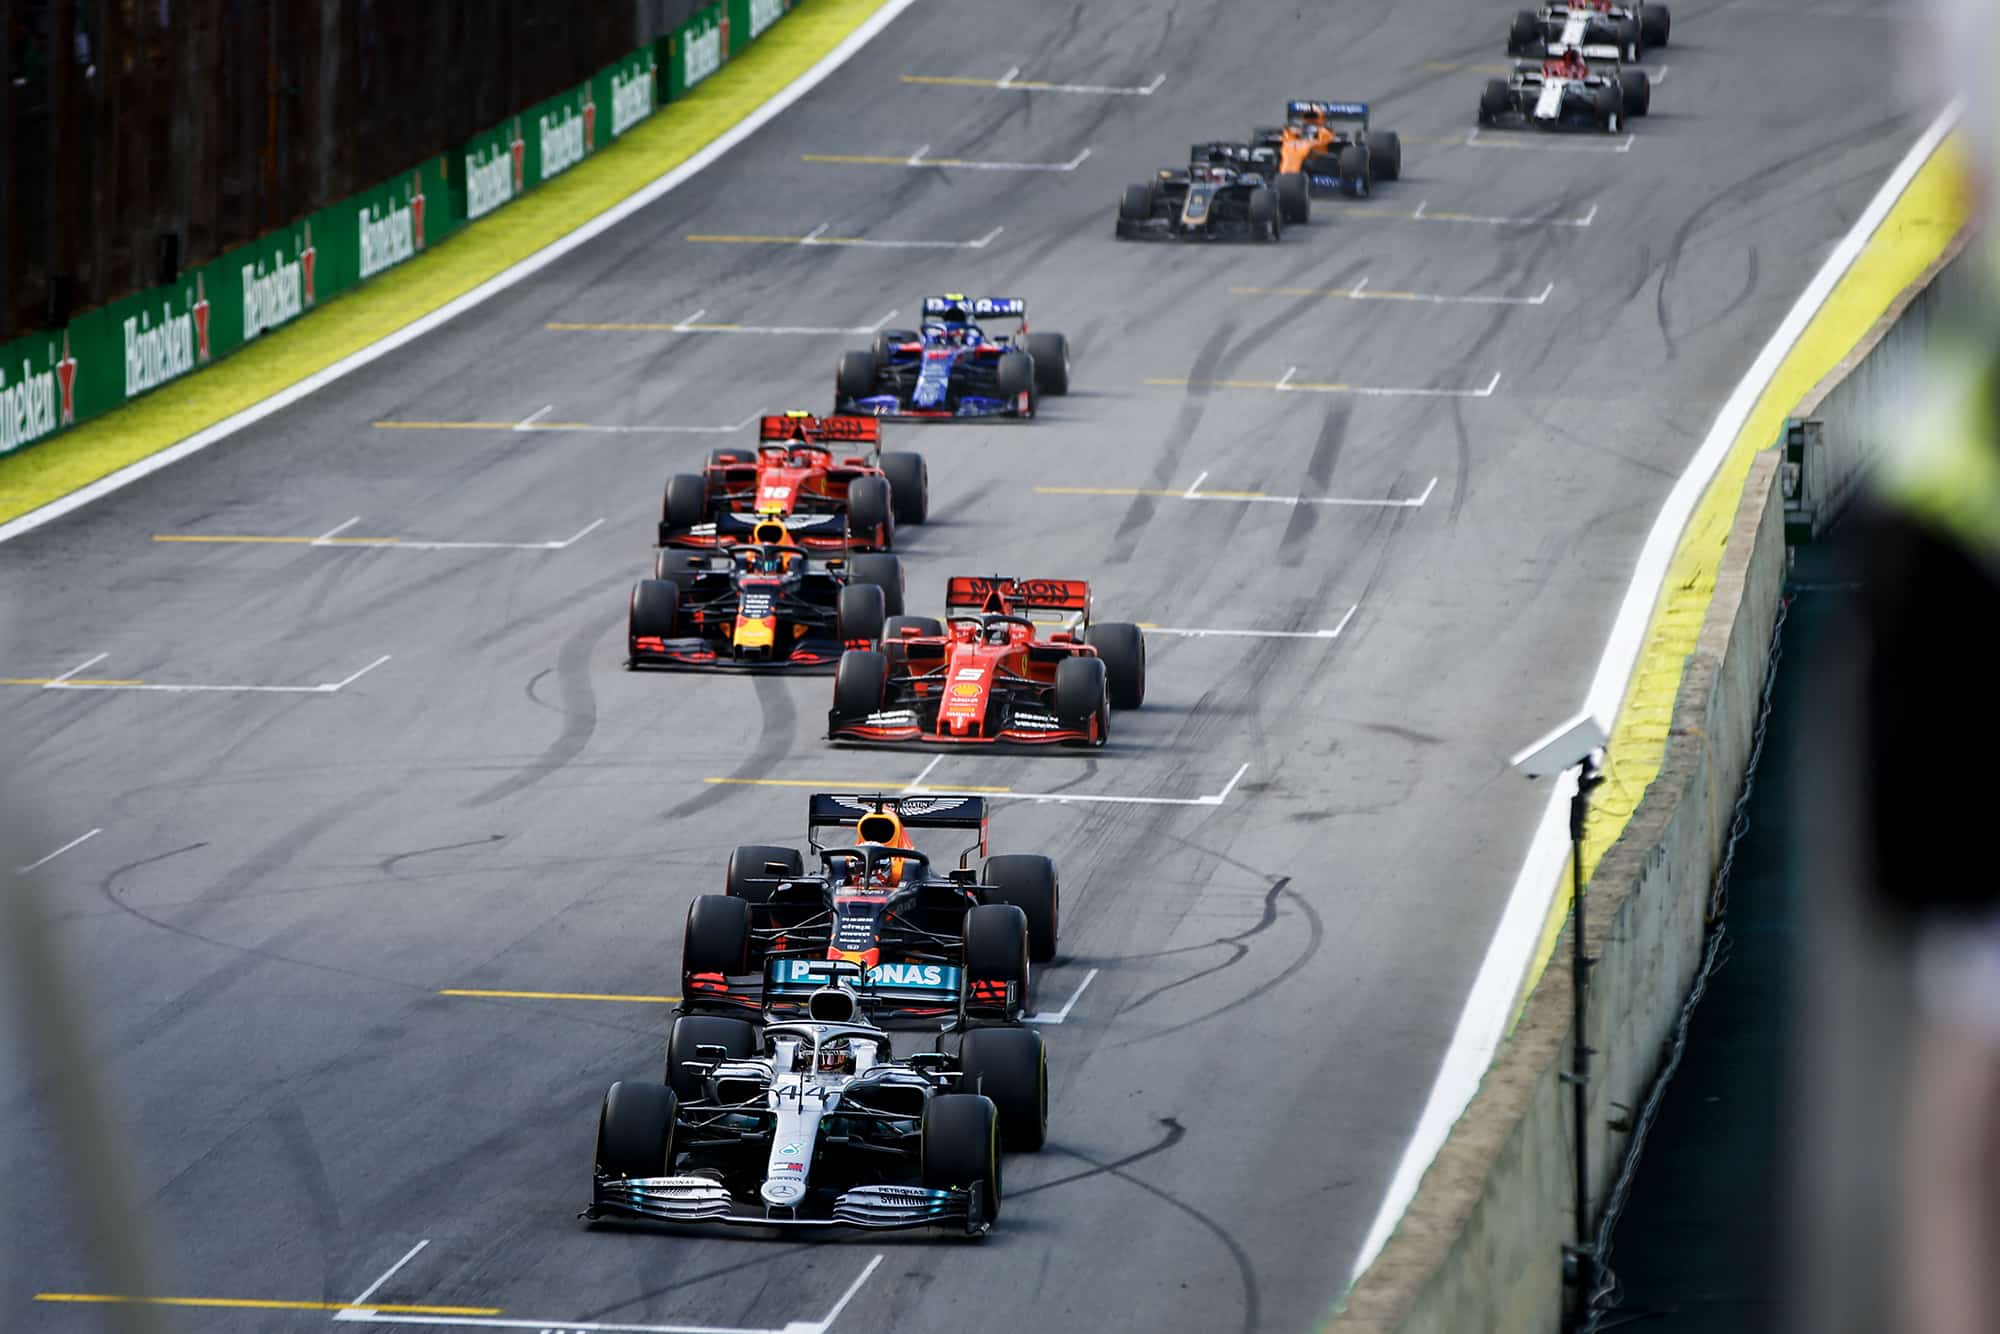 Hamilton ahead during the first restart after the safety car at the 2019 Brazilian Grand Prix